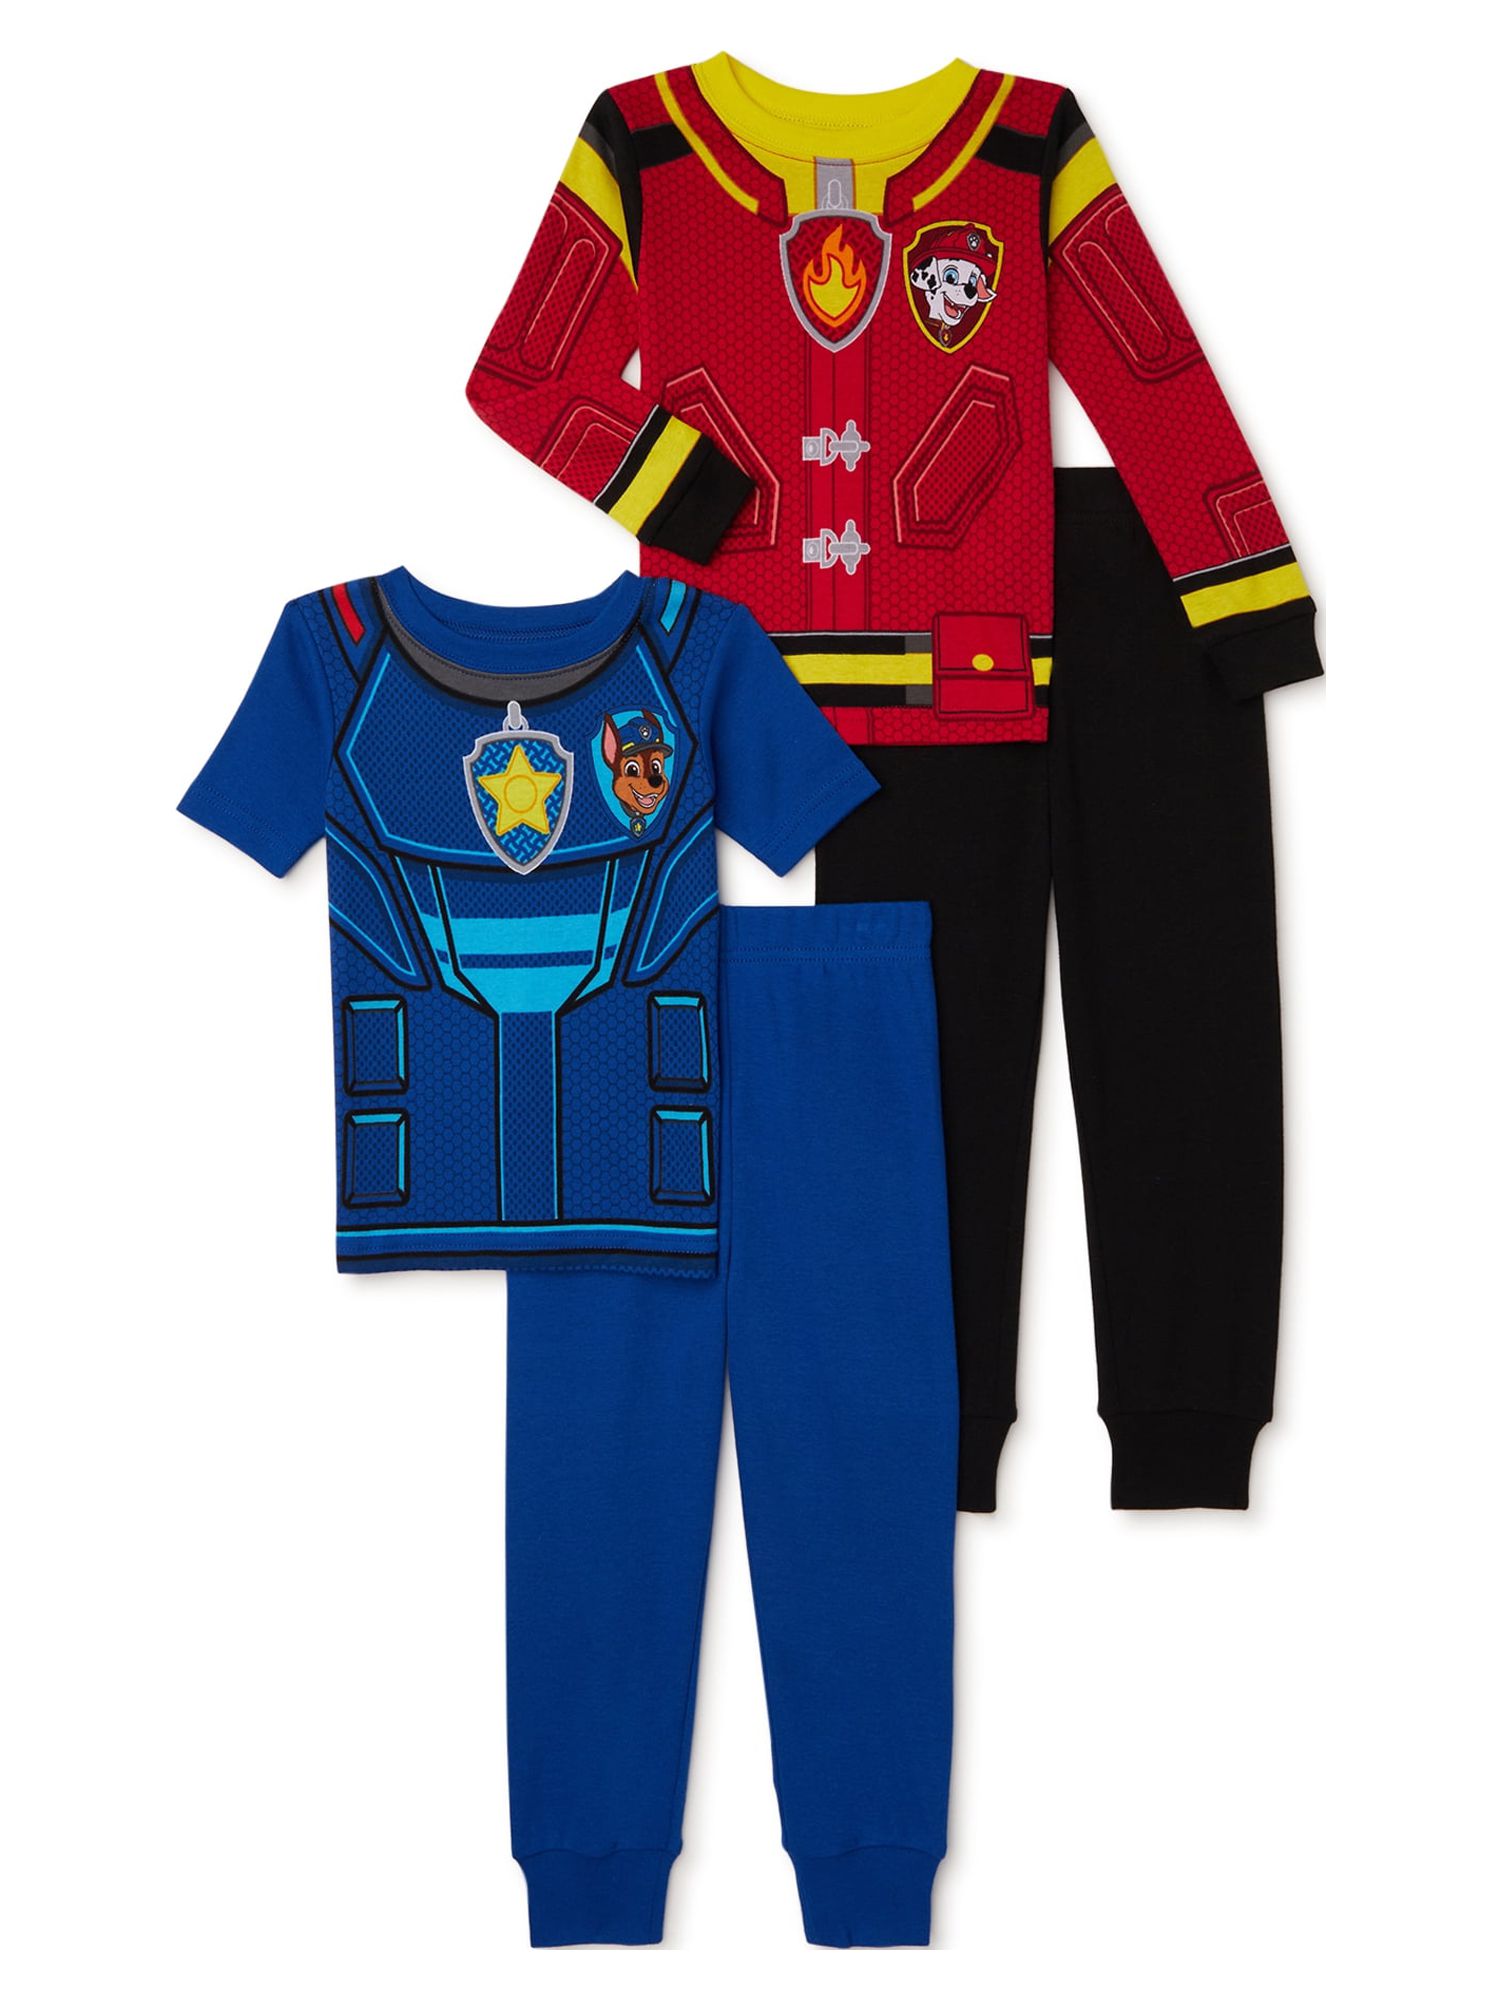 Toddler Character Pajama Set, 4-Piece, Sizes 12M-5T - image 1 of 3